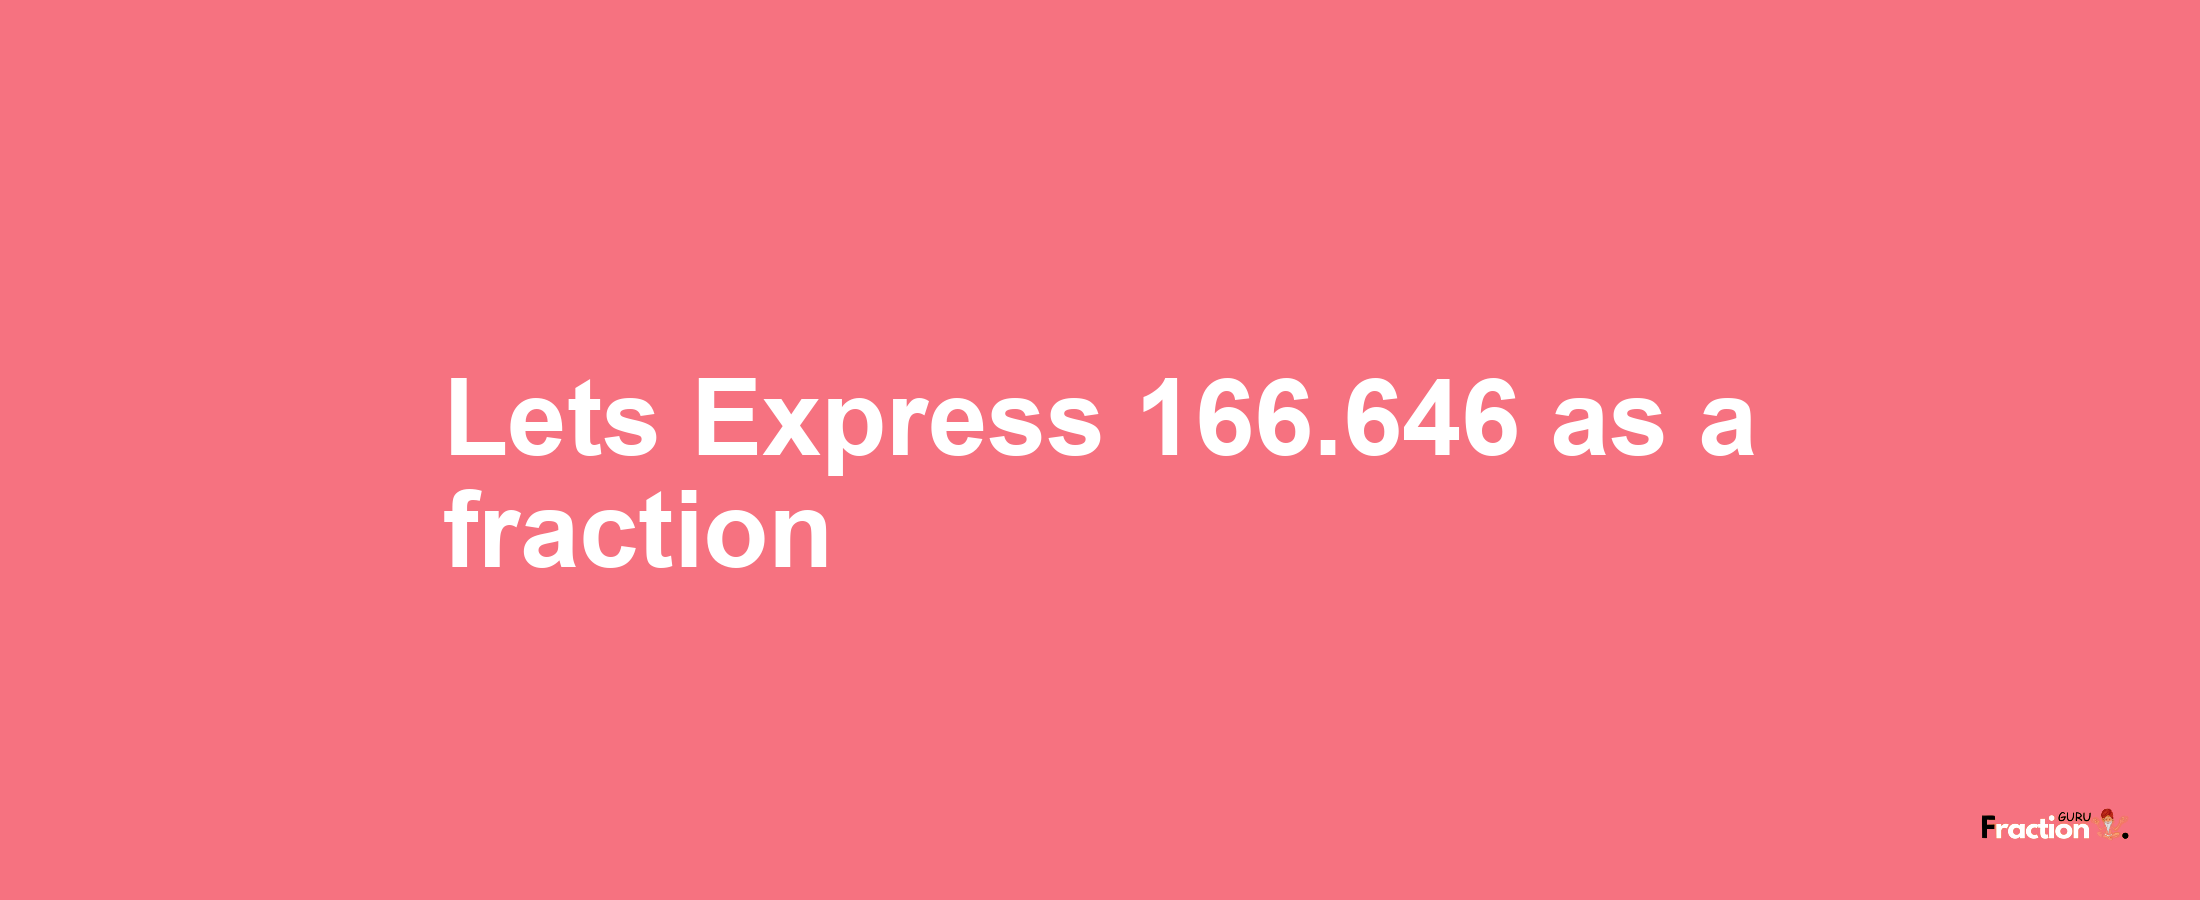 Lets Express 166.646 as afraction